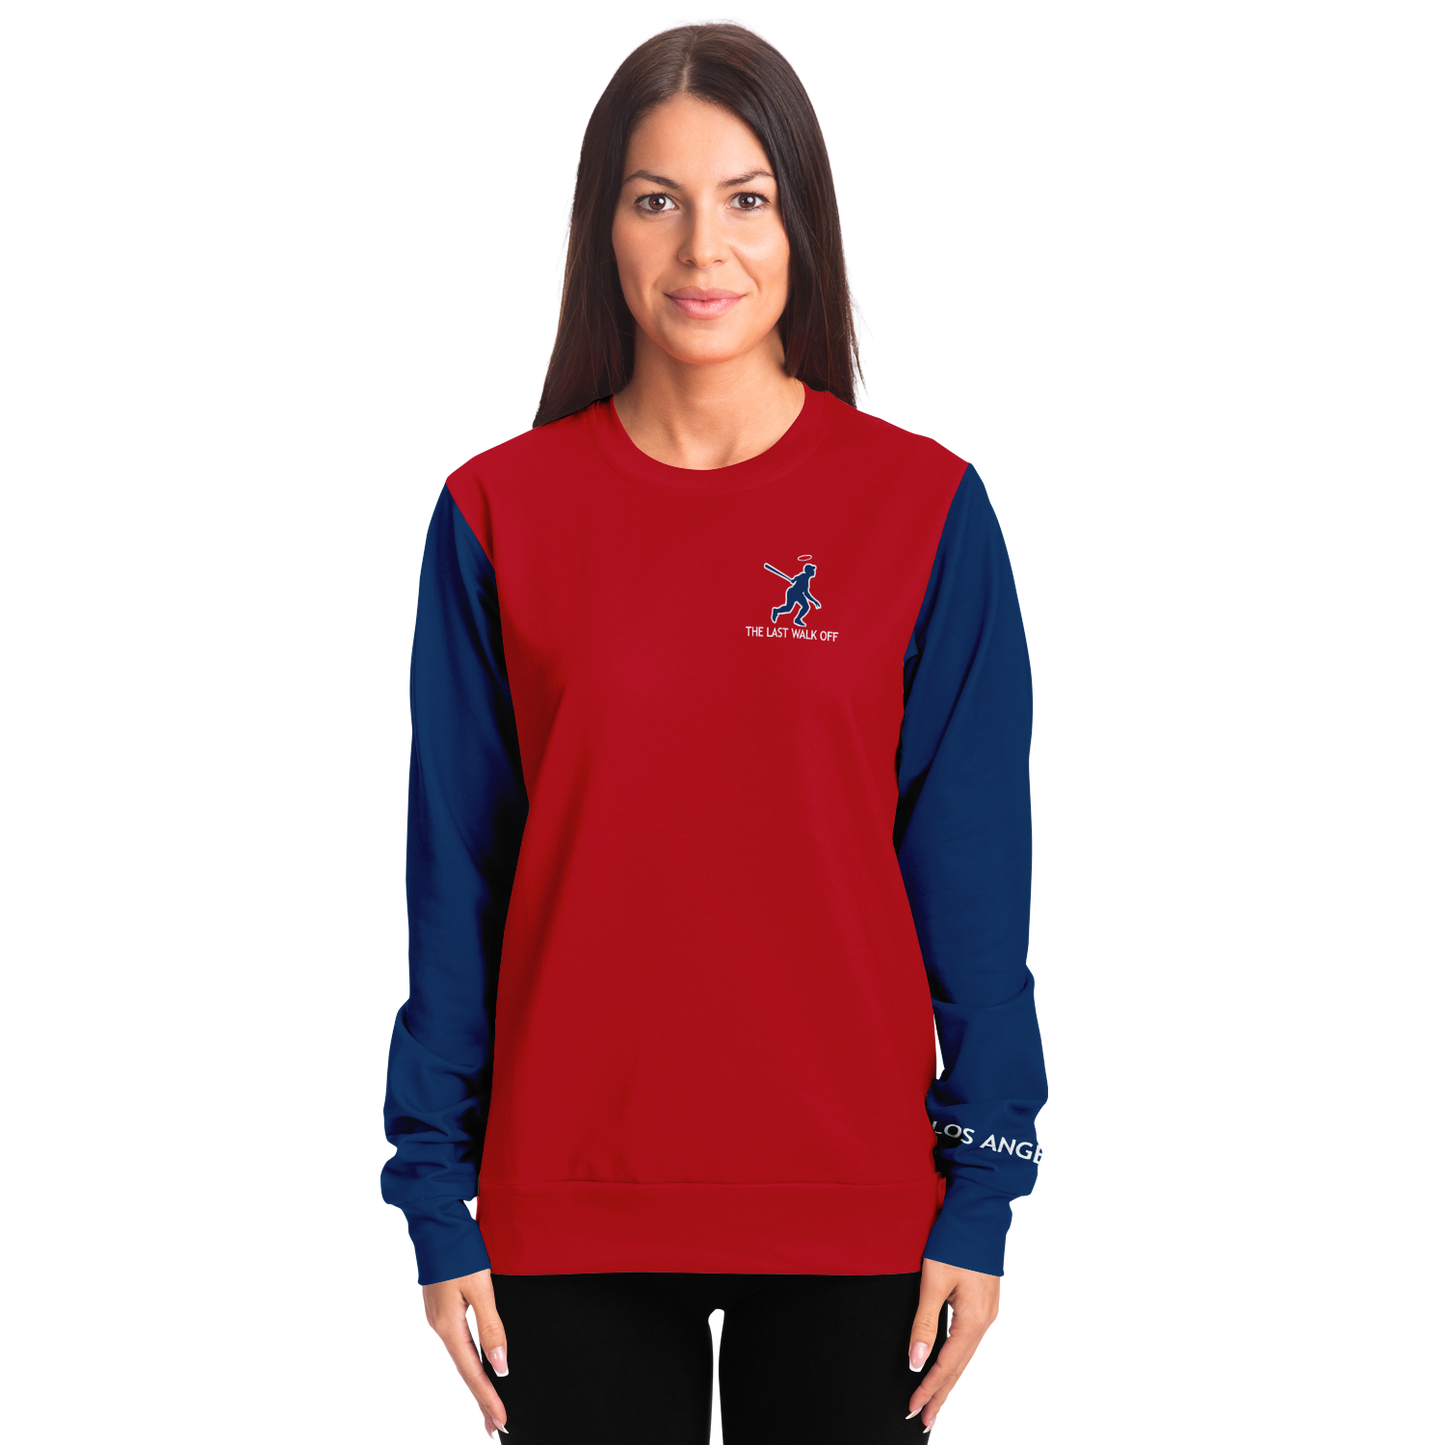 Los Angeles Blue Red Long Sleeve Shirt